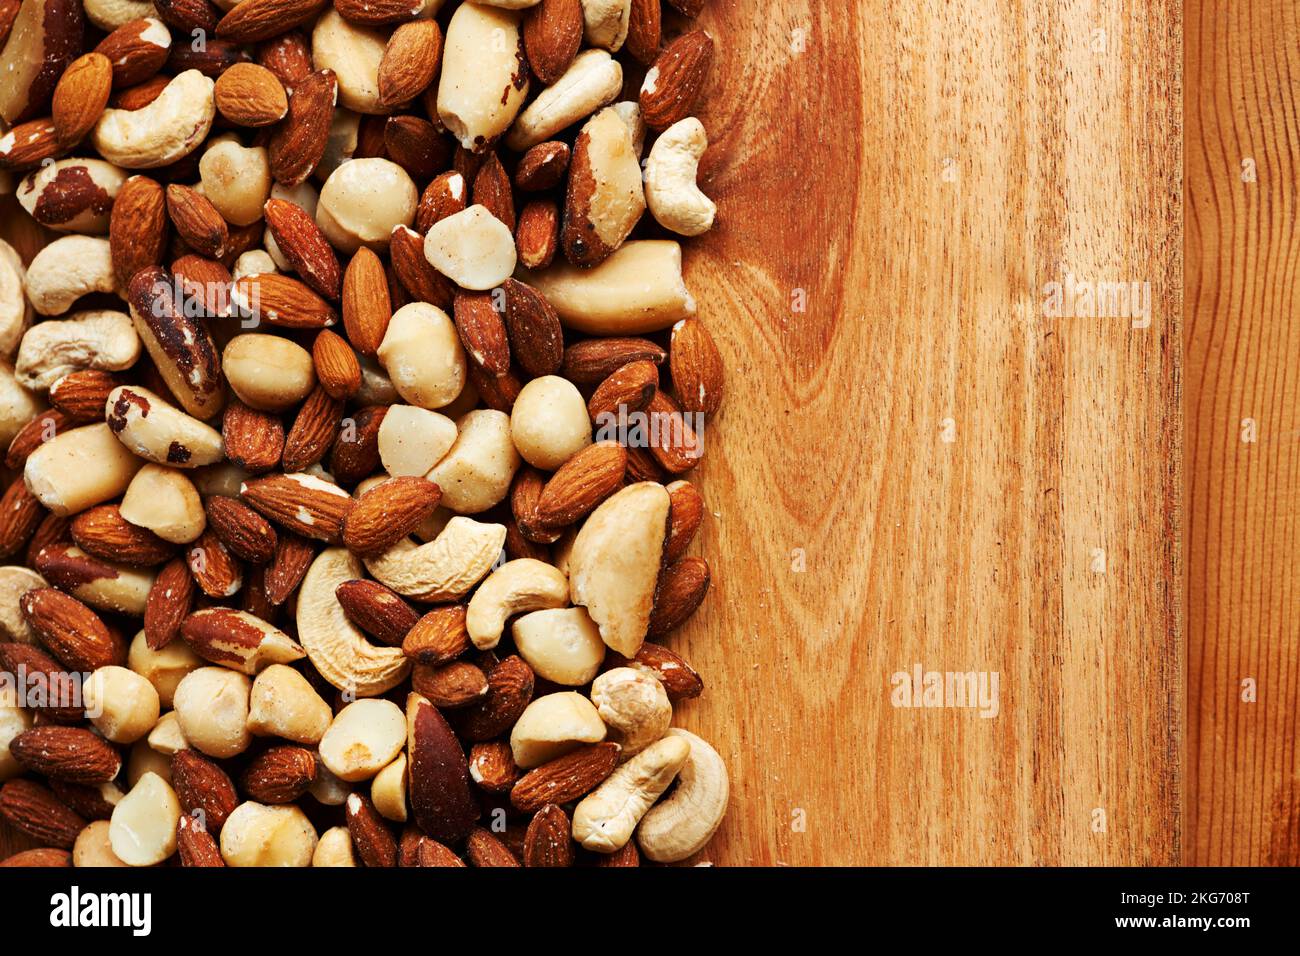 Nuts about nuts. High angle shot of an assortment of nuts on a wooden table. Stock Photo